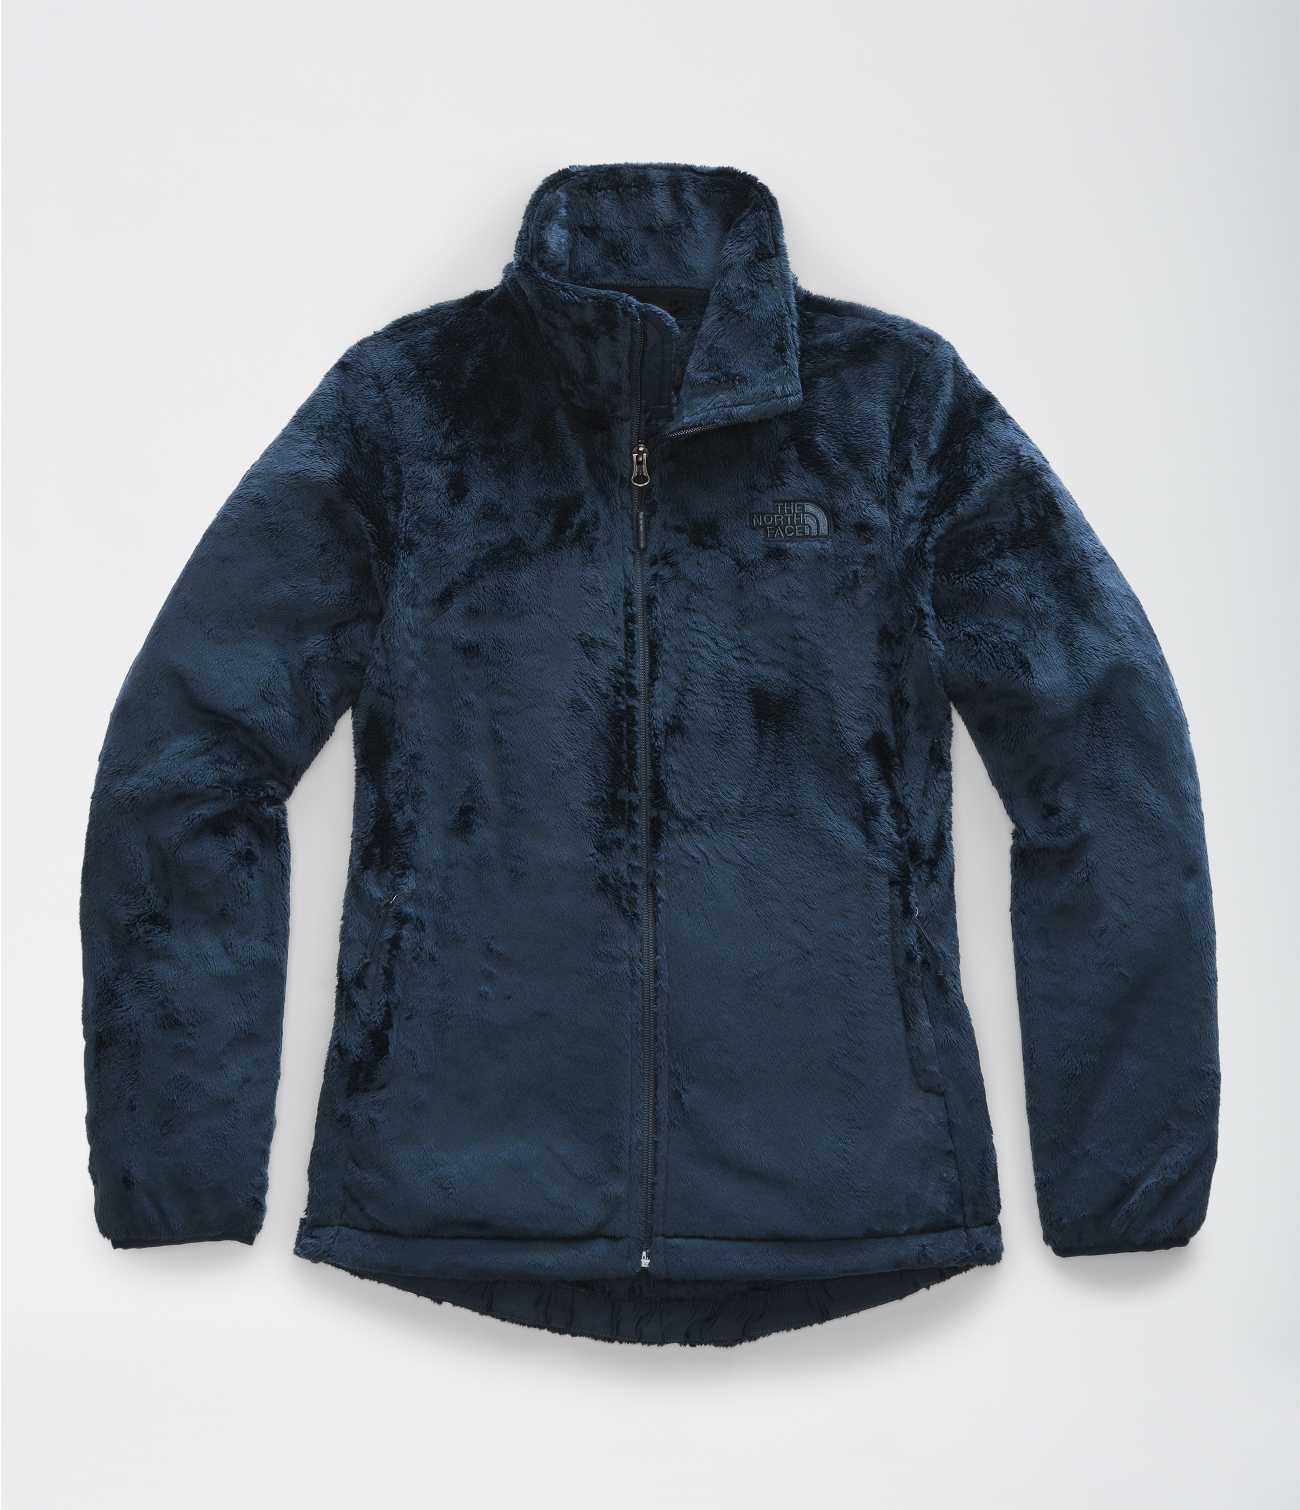 WOMEN'S OSITO JACKET | The North Face | The North Face Renewed